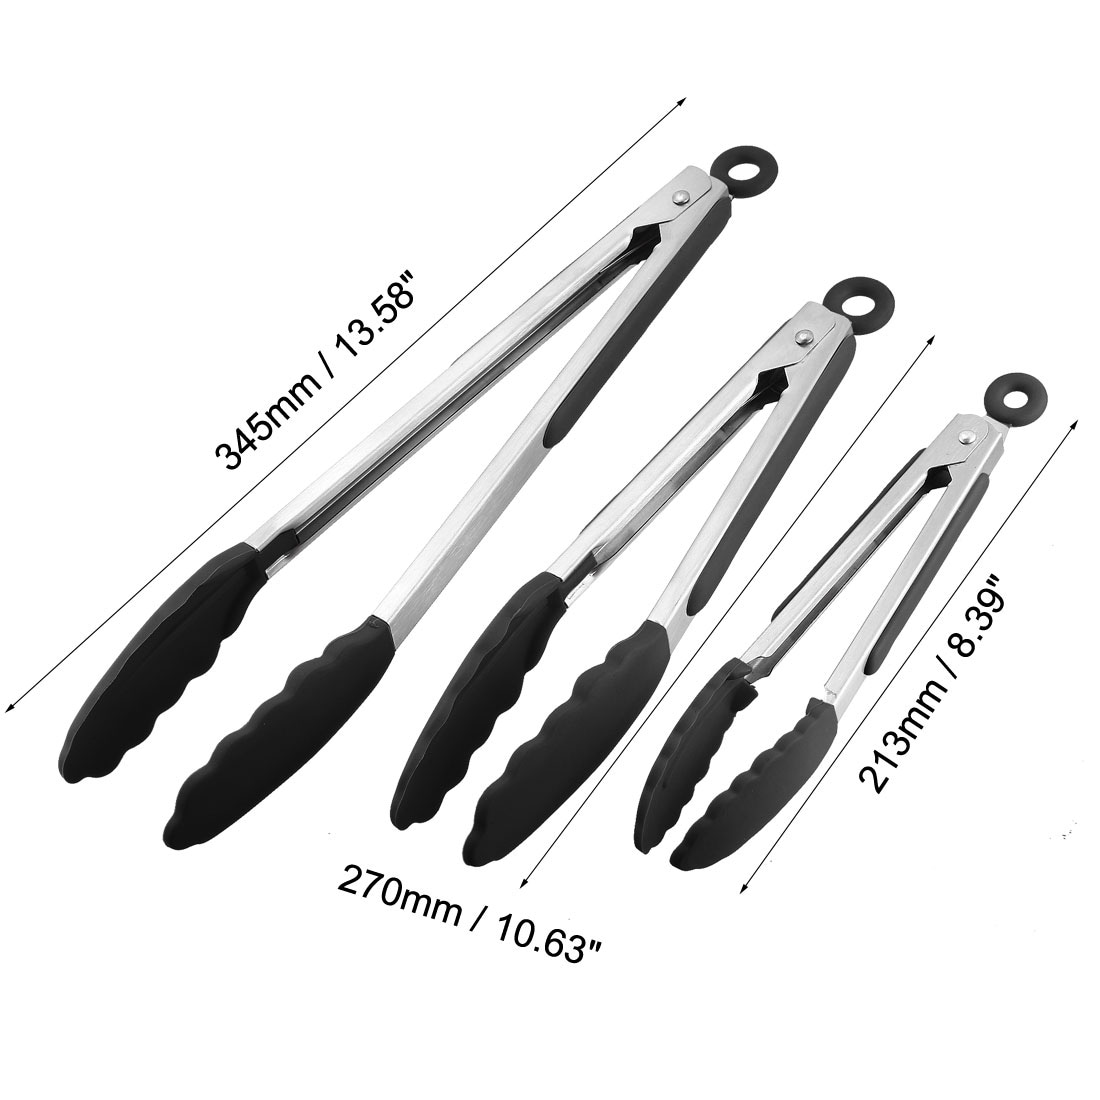 https://ak1.ostkcdn.com/images/products/is/images/direct/e8e1d82c3681229384c20c97537fb3dd73eb801c/Kitchen-Tongs-Stainless-Steel-Locking-Tong-Set-of-3-7-inch-9-inch-12-inch-Black.jpg